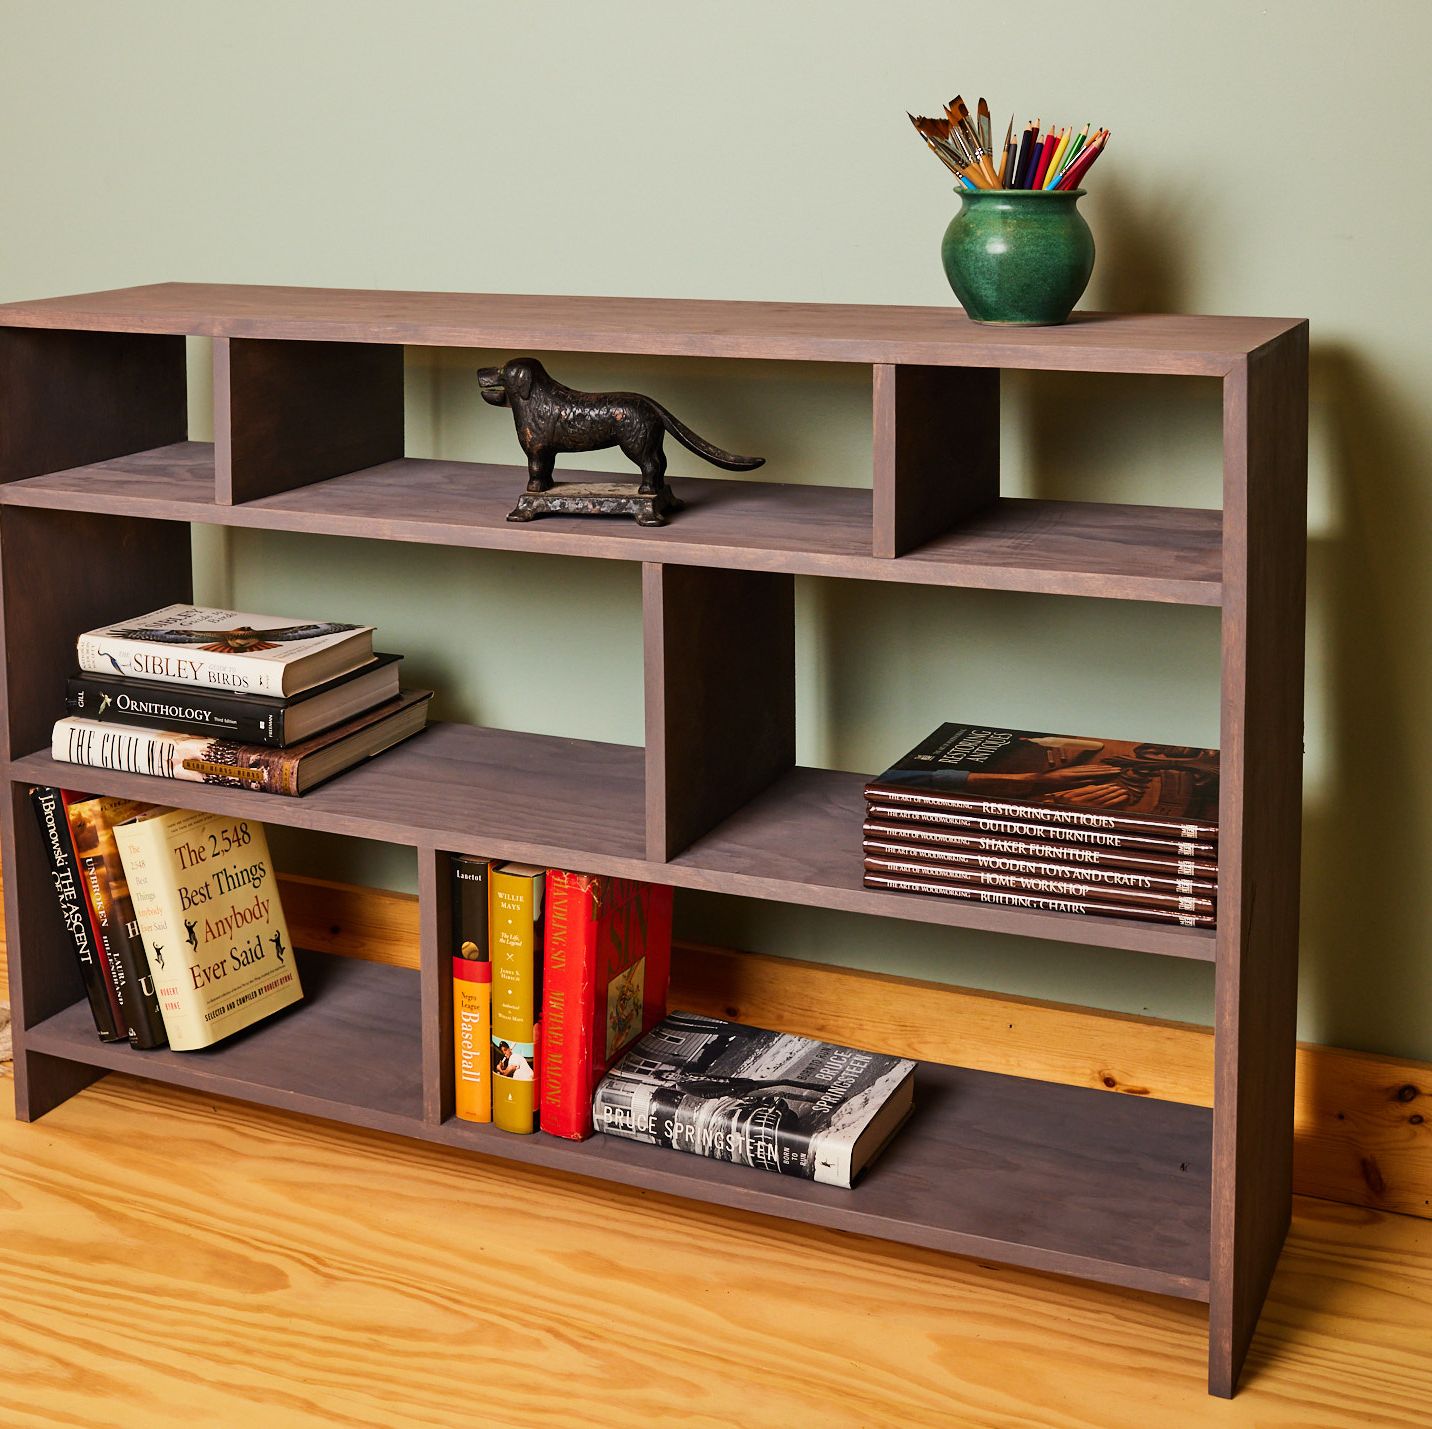 Build This Great DIY Bookshelf With a Track Saw